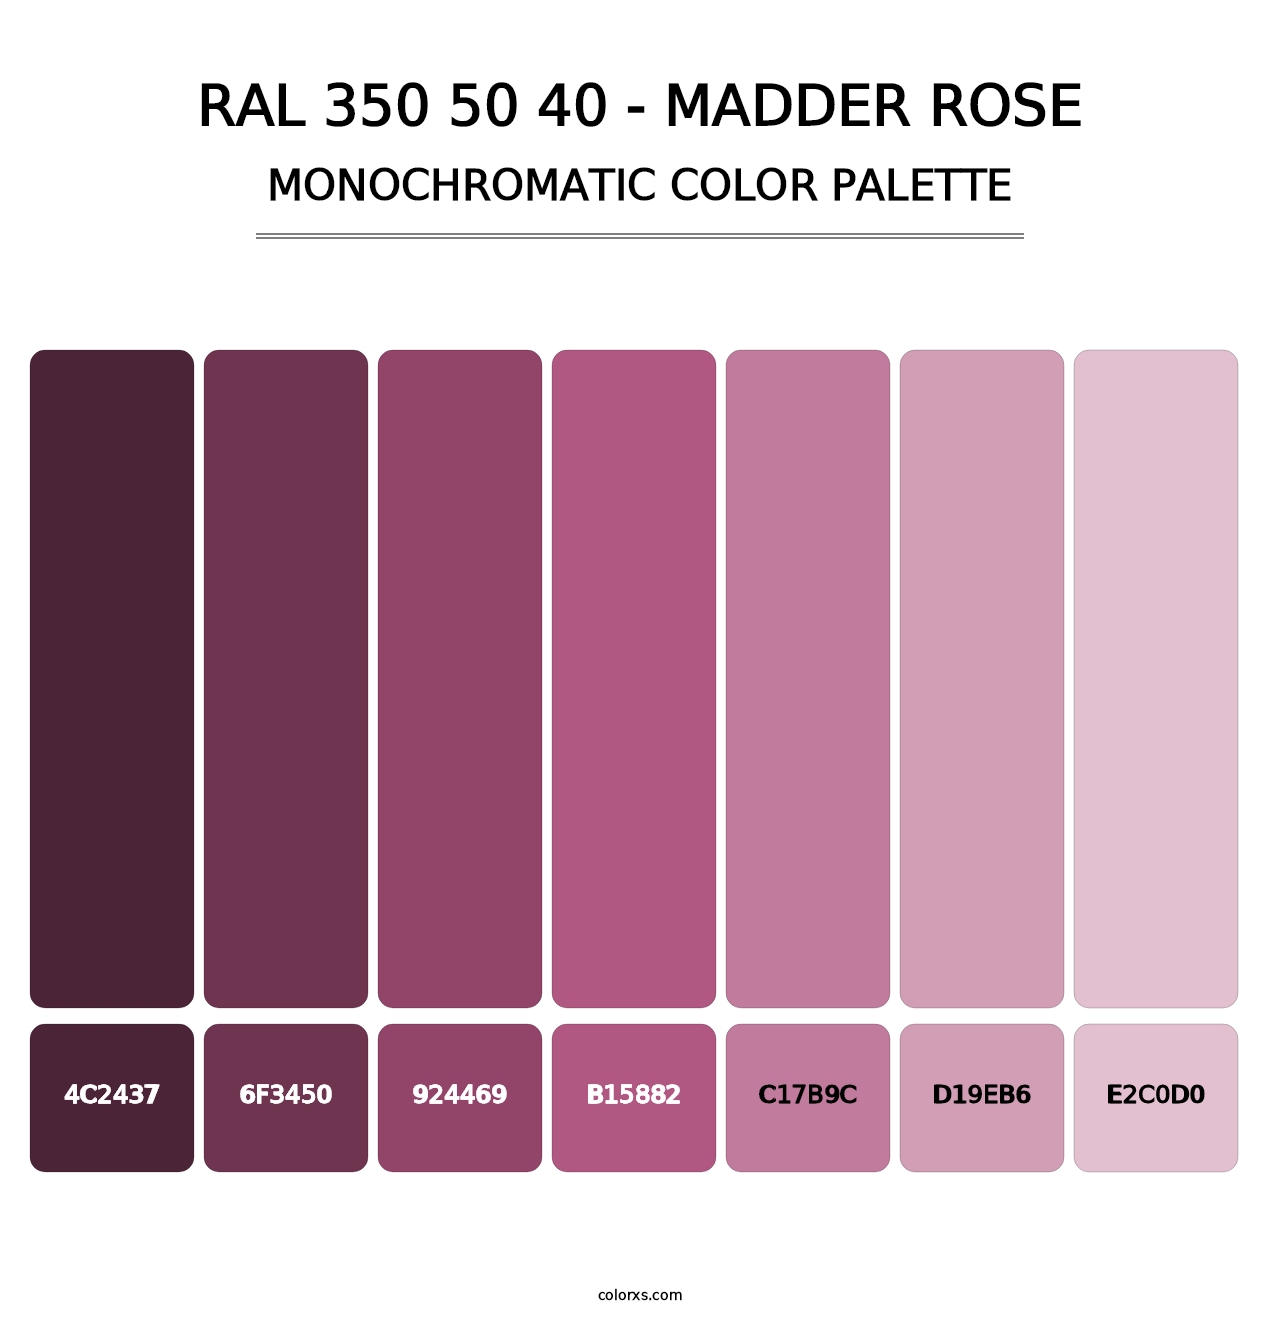 RAL 350 50 40 - Madder Rose - Monochromatic Color Palette